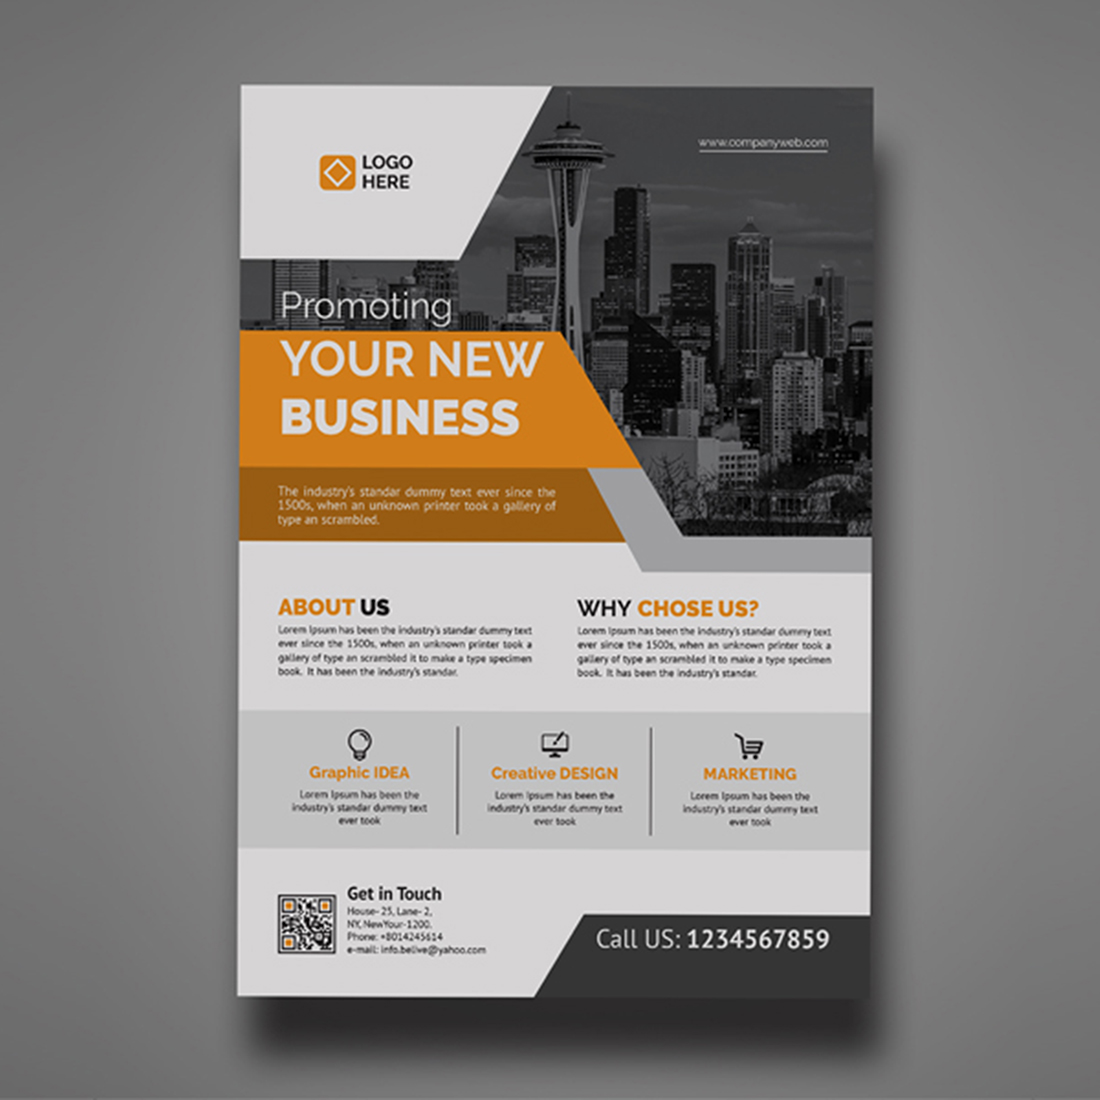 Corporate Business Flyer with Yellow Template cover image.